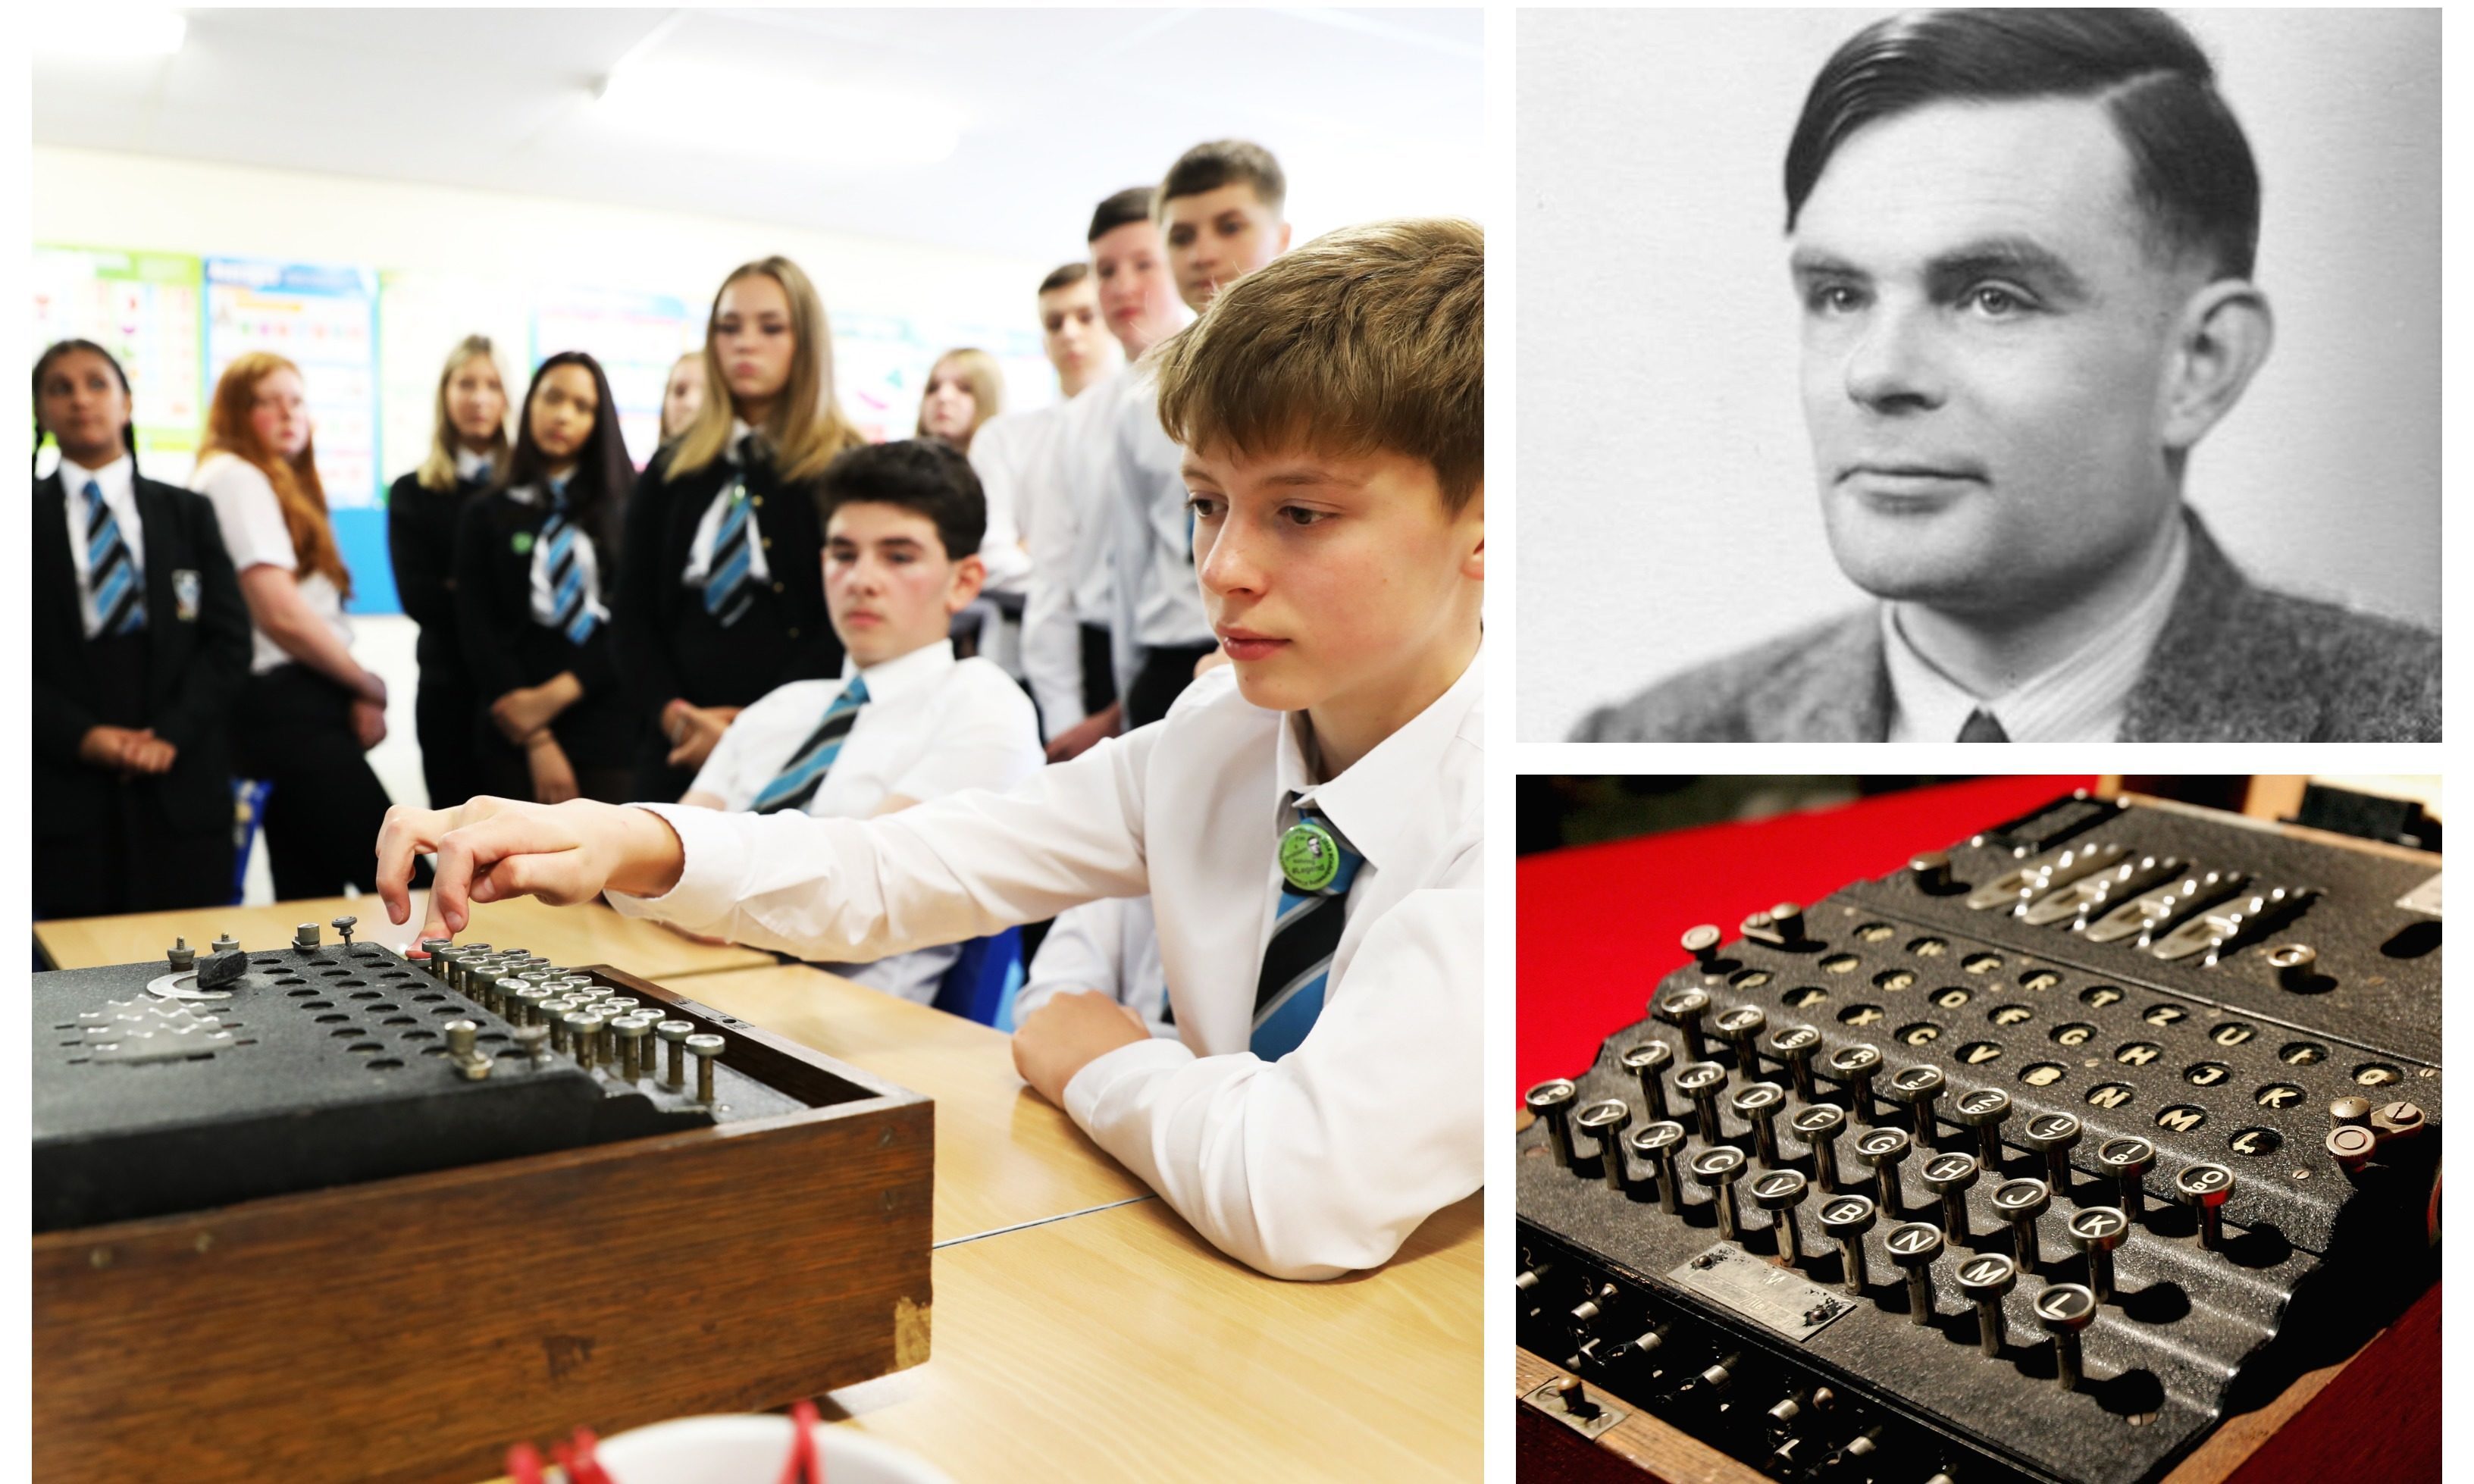 Pictured: Pupils using the touring Enigma machine/ Alan Turing/A German WW2 Enigma machine.